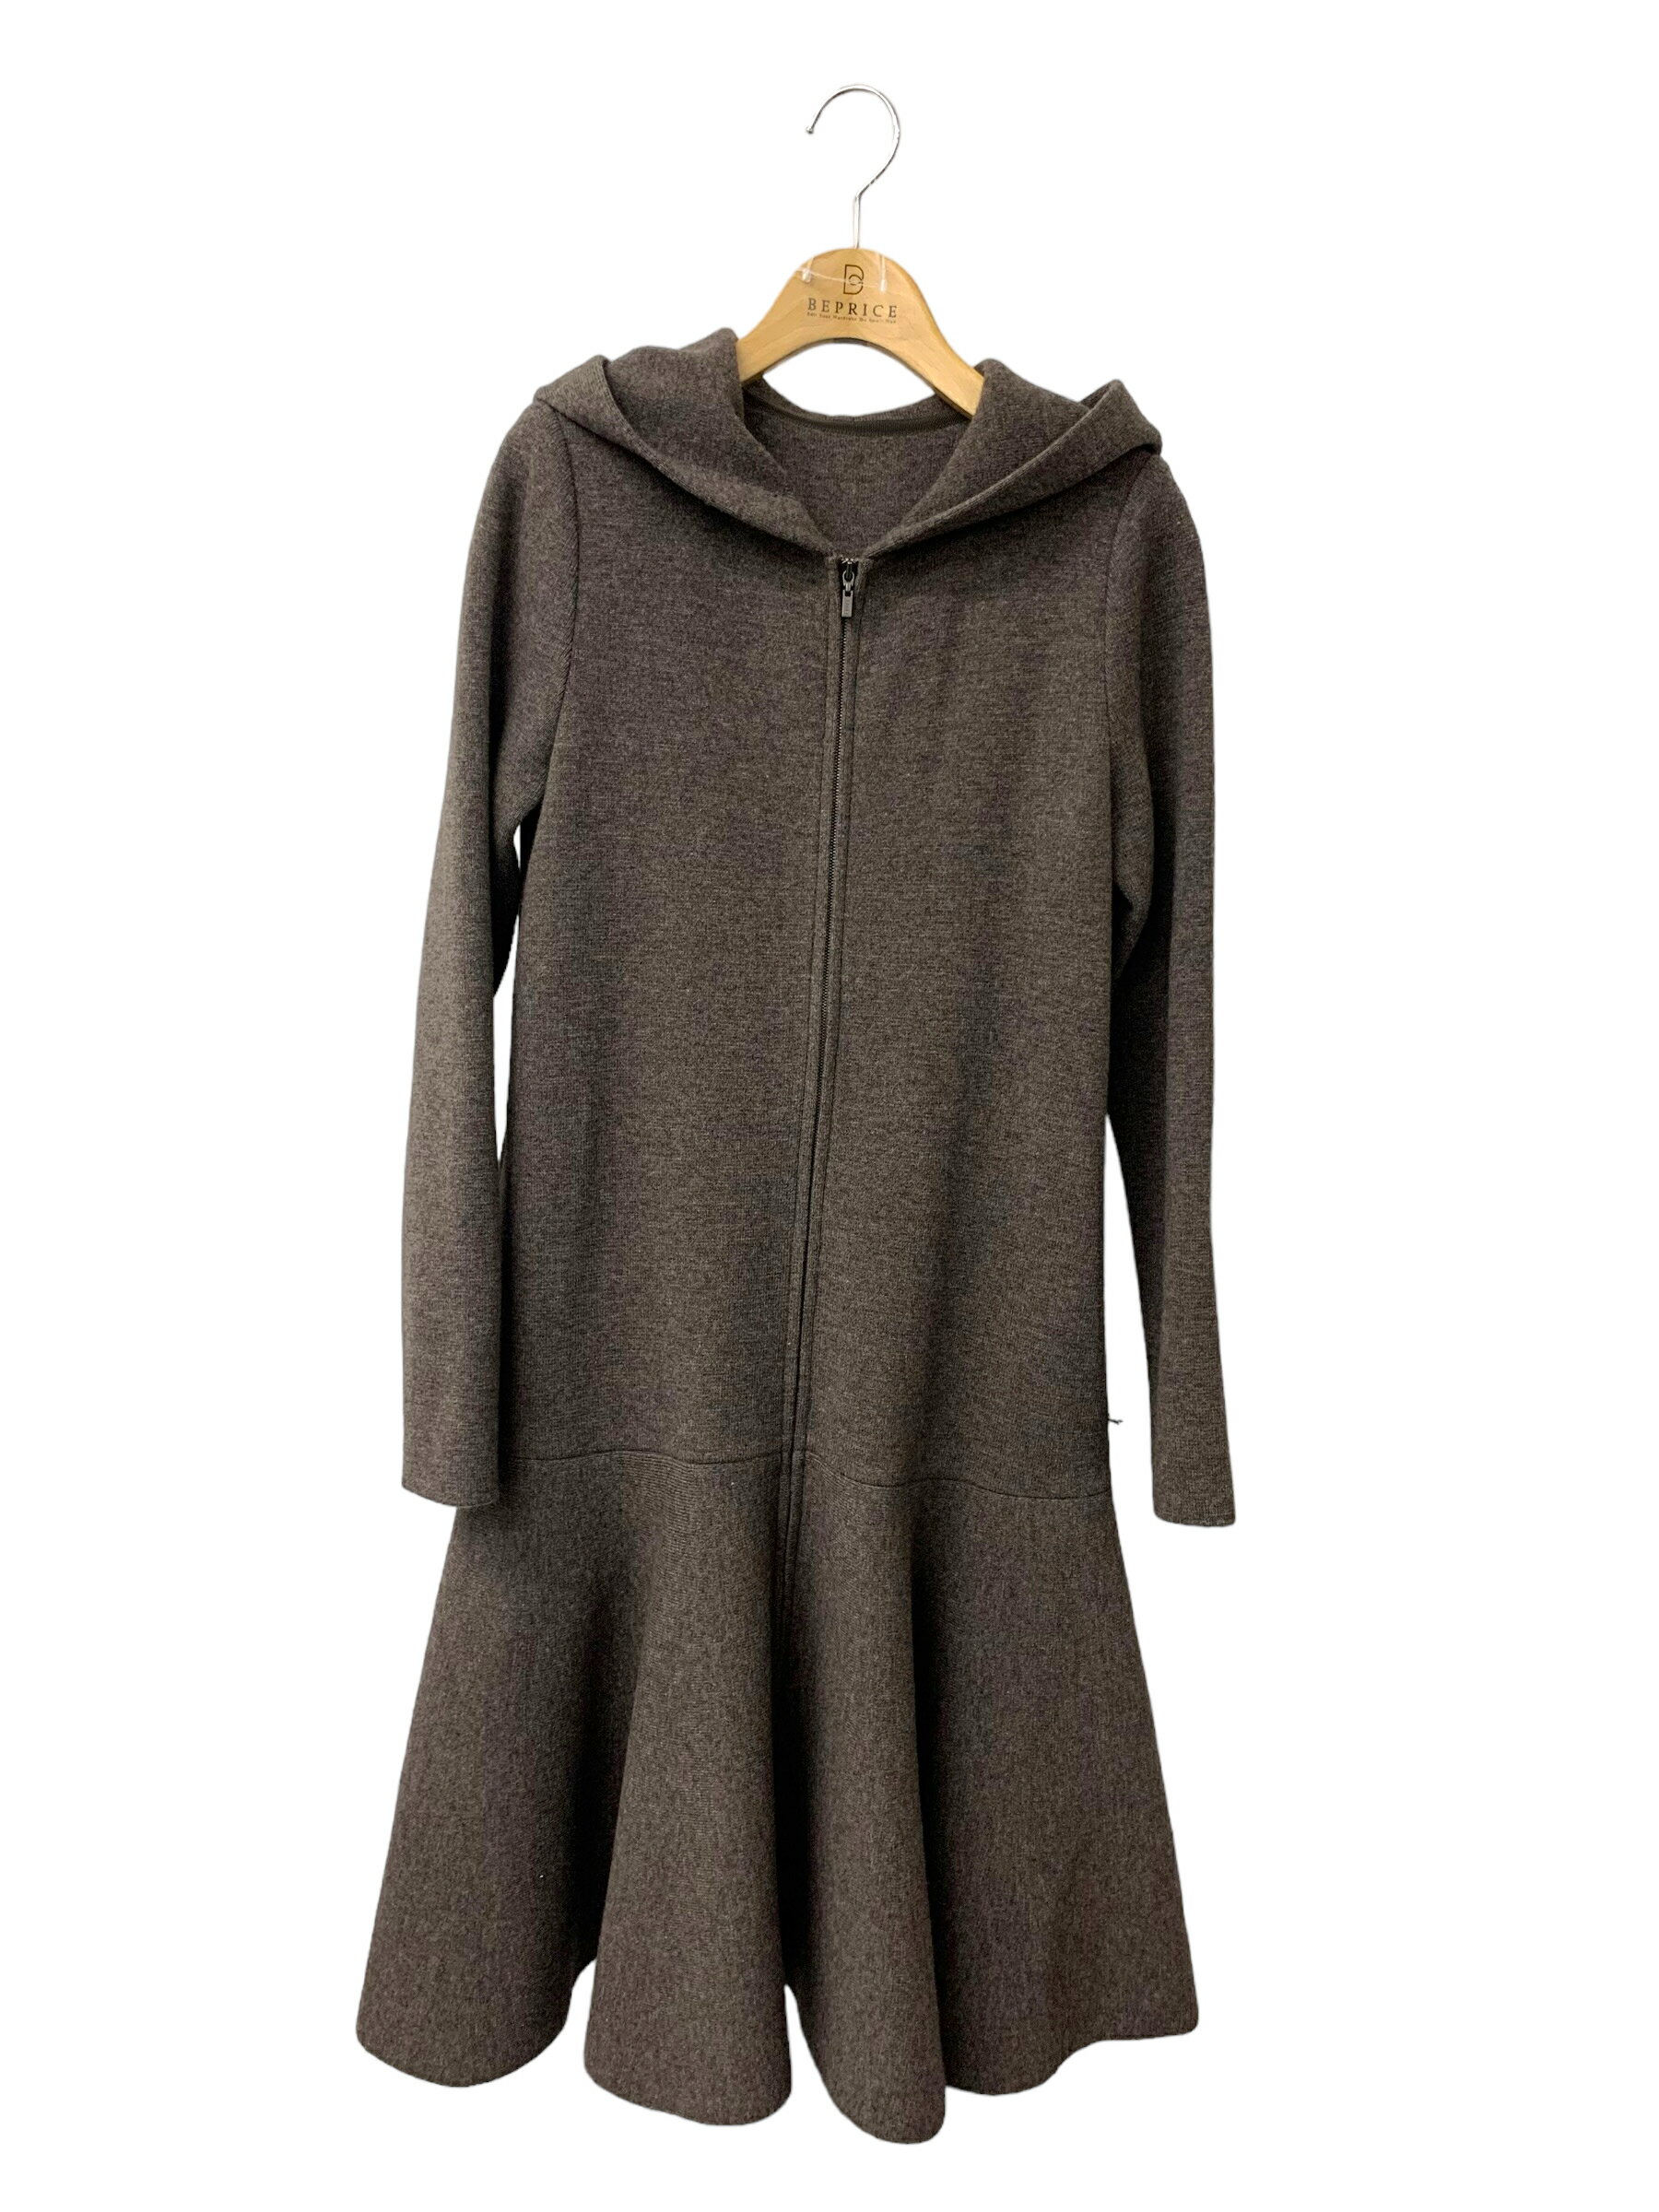 【10％OFF】 フォクシーブティック Knit Dress Amore 43966 ワンピース 38 ブラウン【中古】 ITXMG2TBHN74 RSS10